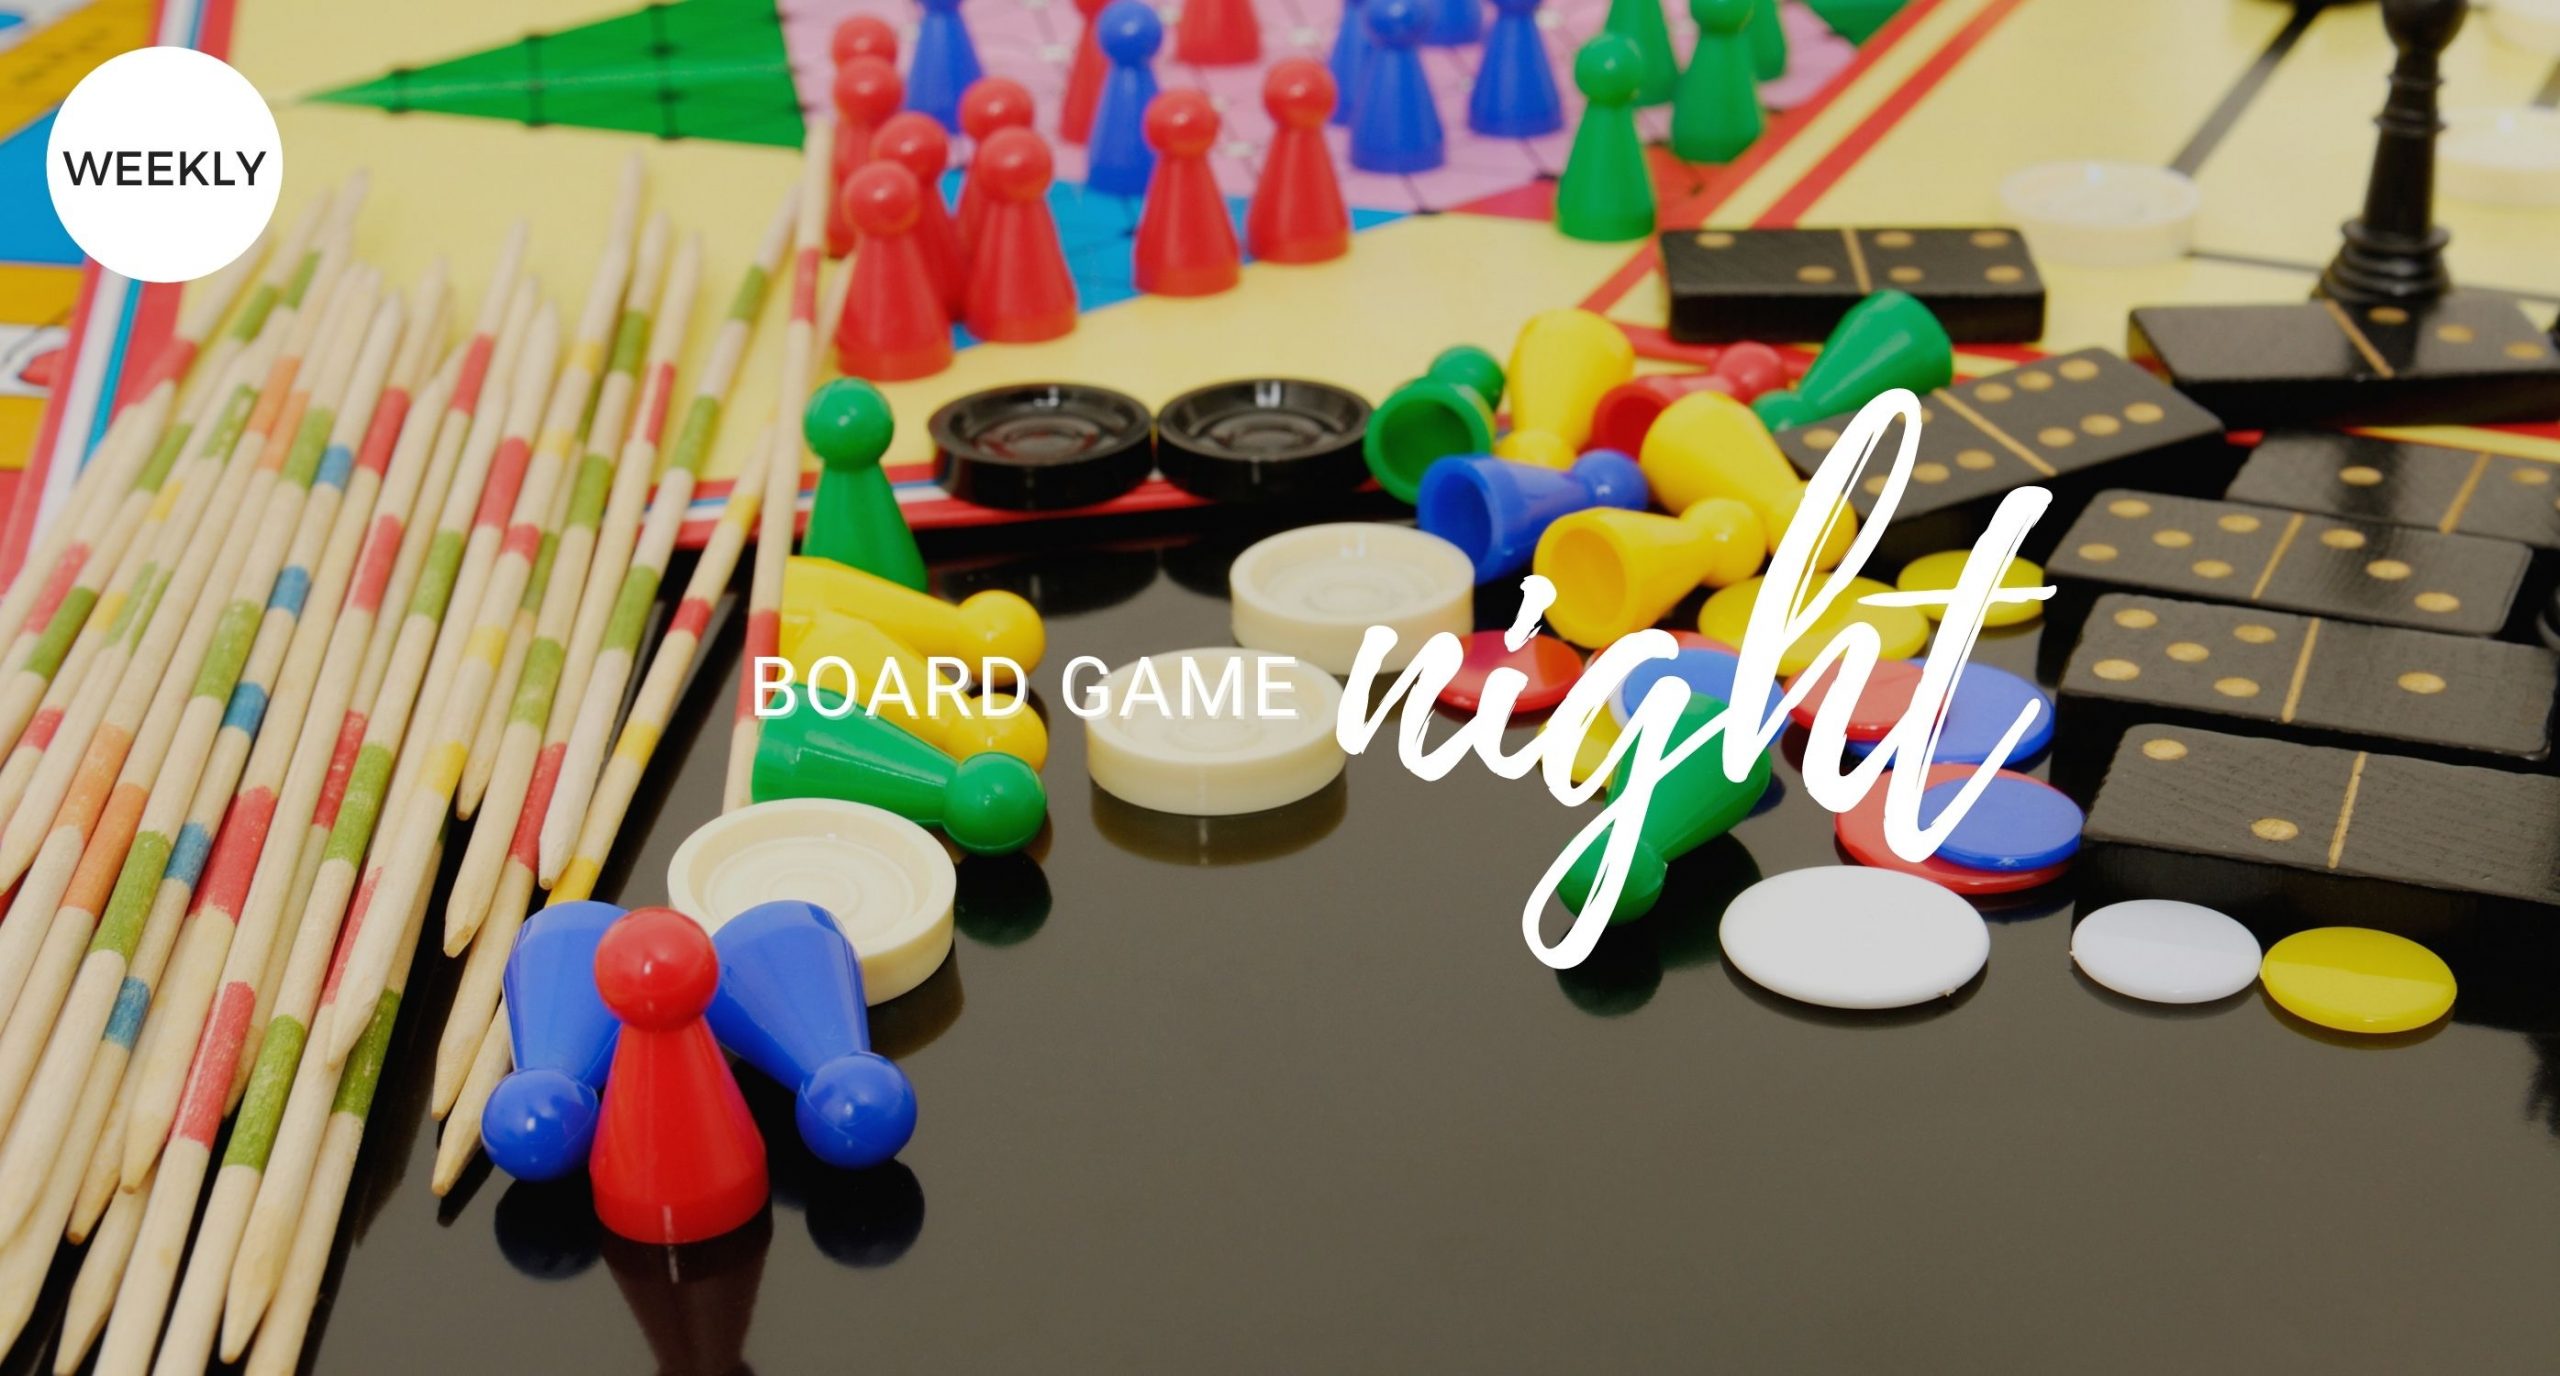 May Events, Board Game Night, Penn Cove Tap room, Things to Do on Whidbey, Board Game, Oak Harbor, Coupeville, Freeland, Washington, Whidbey Island